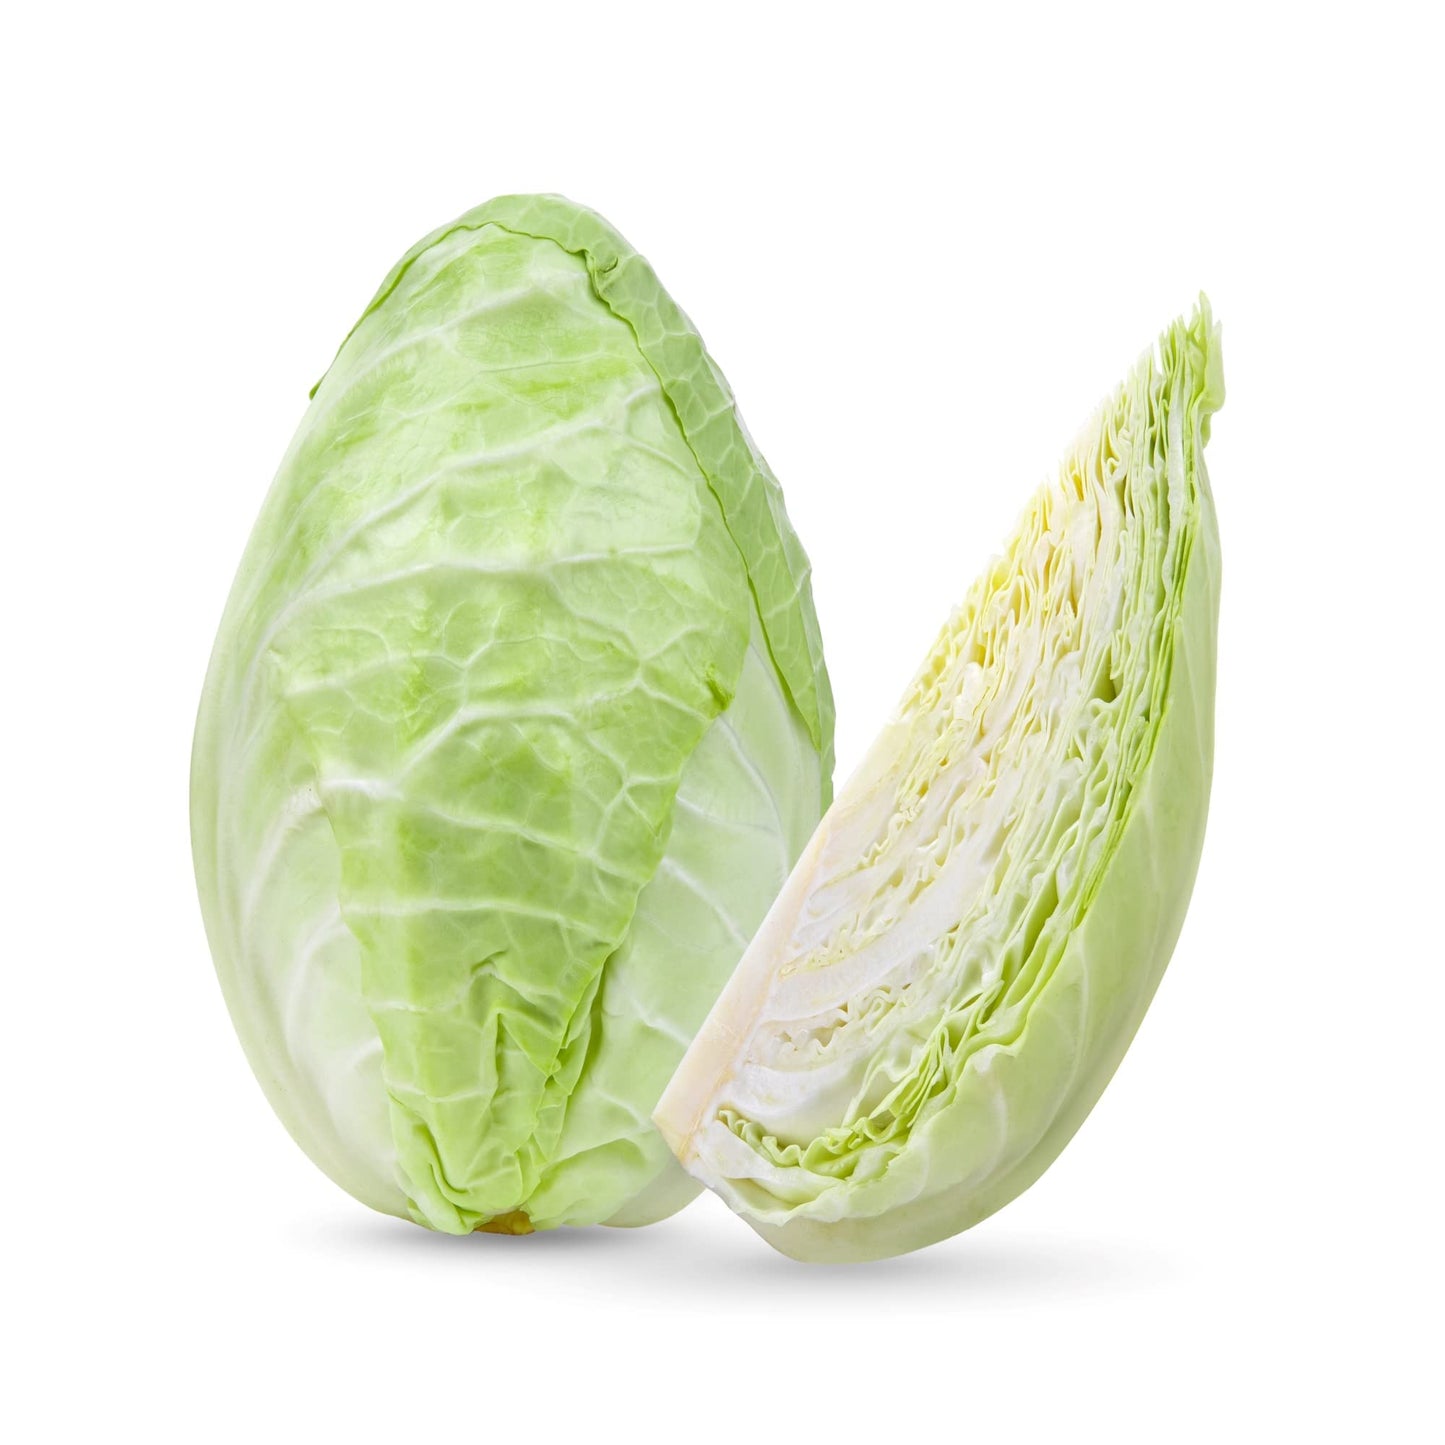 Cabbage 'Duchy' - 12 x Full Plant Pack